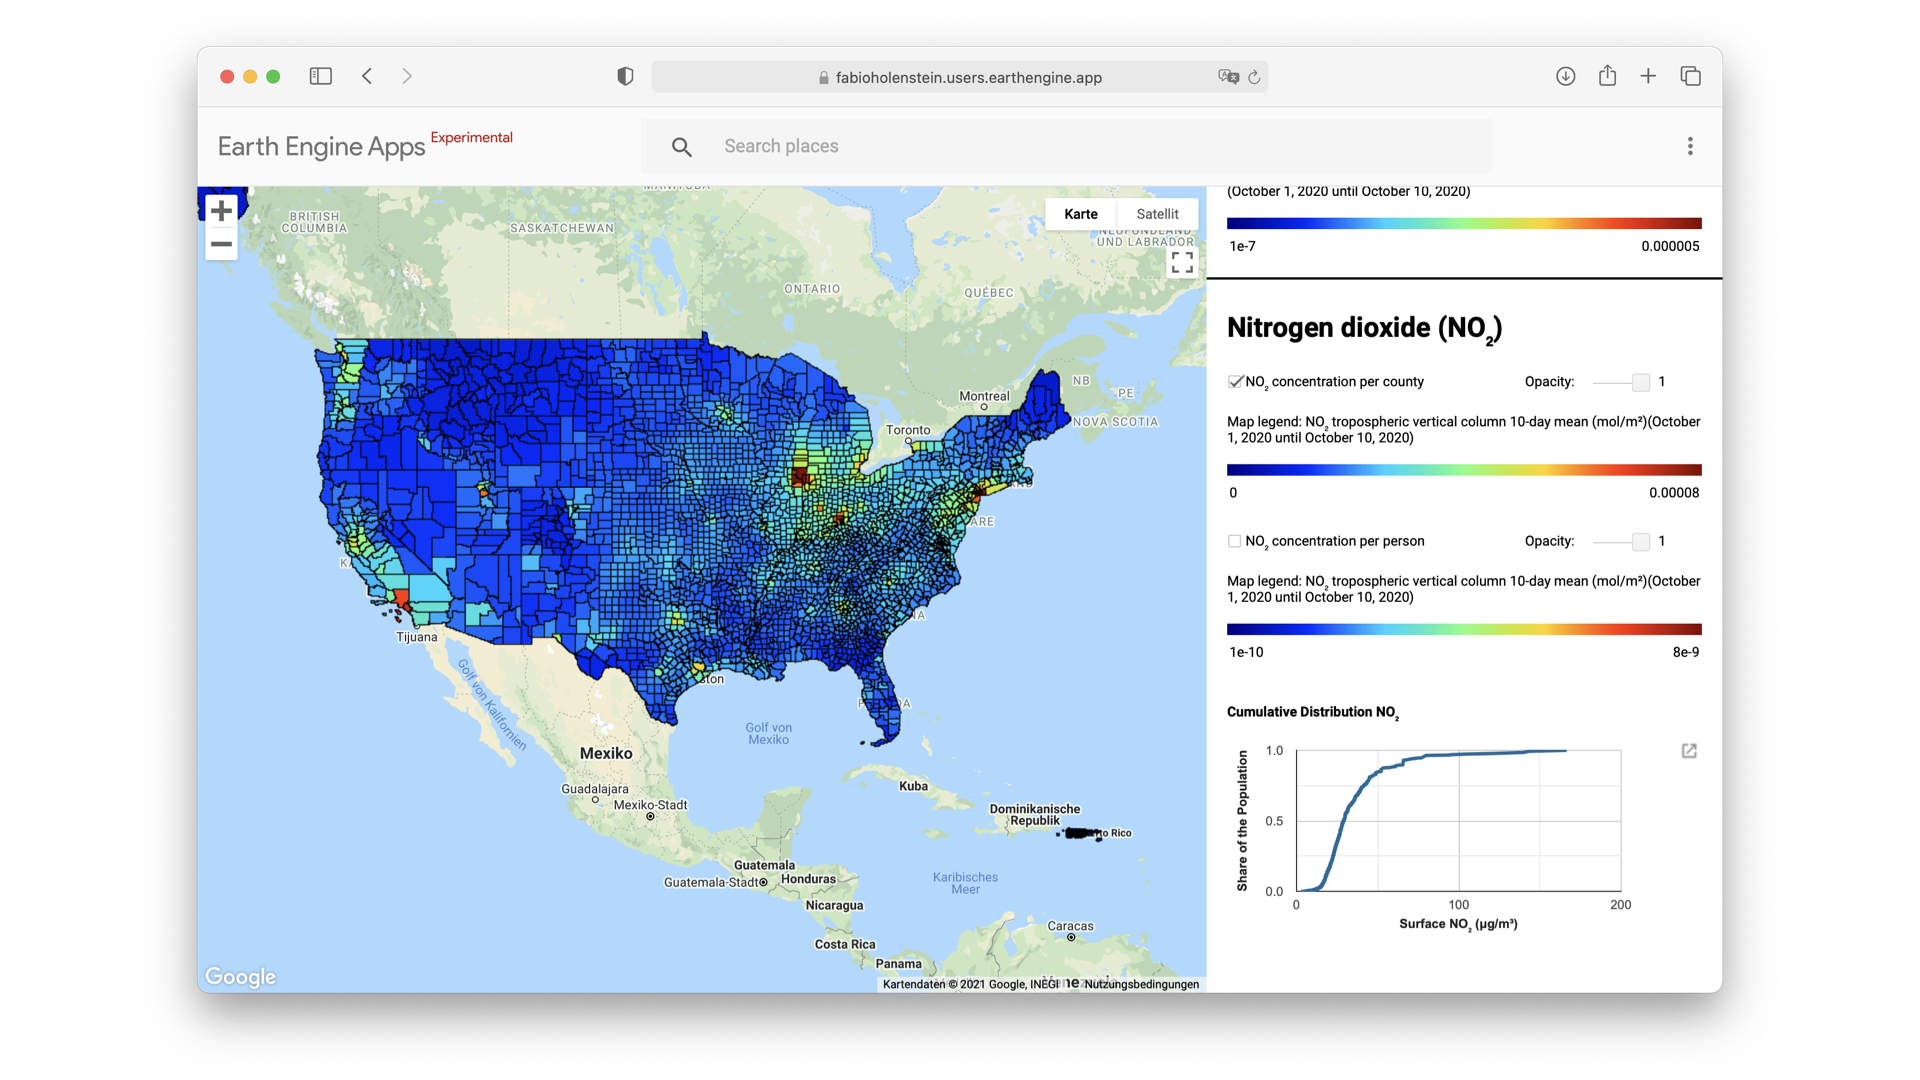 Visualization of the average NO2 concentration in the US on a per-county bassi. This app is available <a href='https://fabioholenstein.users.earthengine.app/view/anthropogenic-emissions-in-the-3144-counties-of-the-usa'>online</a>.